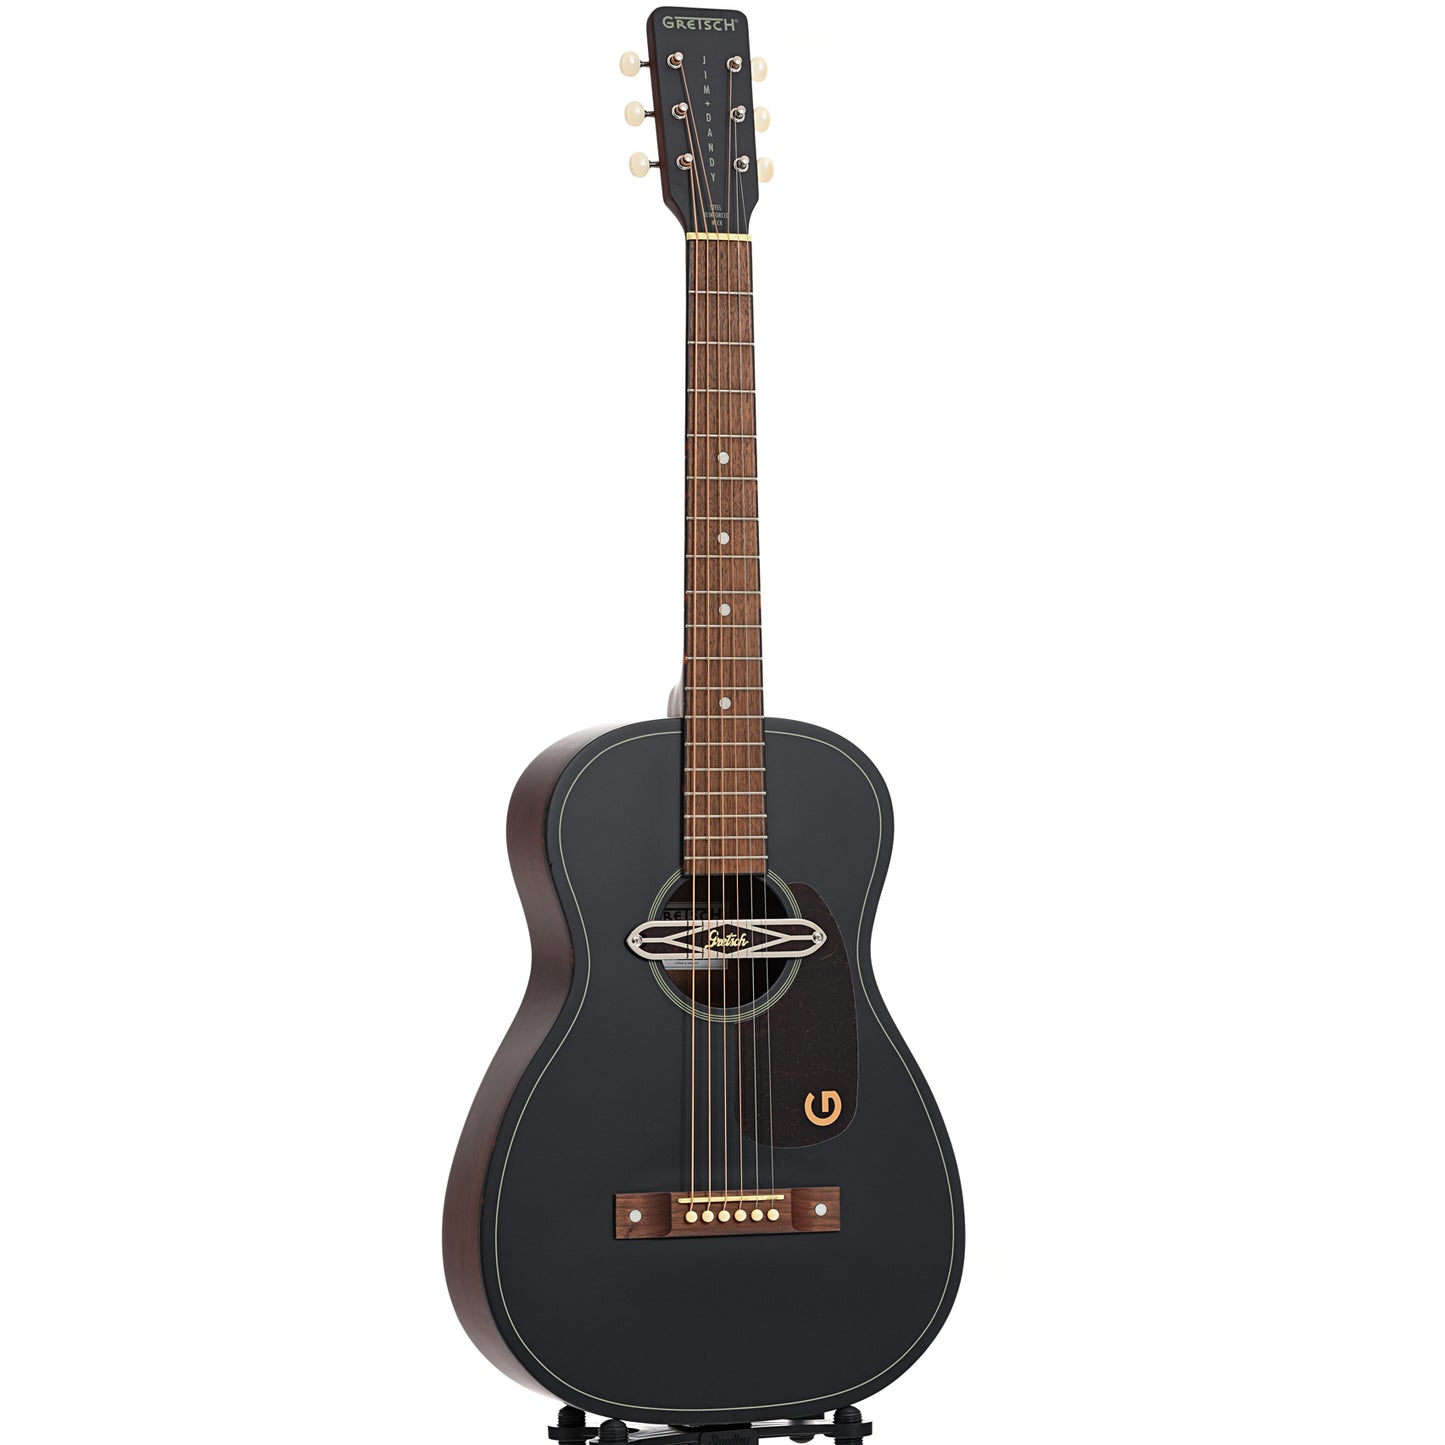 Full front and side of Gretsch Jim Dandy Deltoluxe Parlor Acoustic/Electric Guitar, Black Top